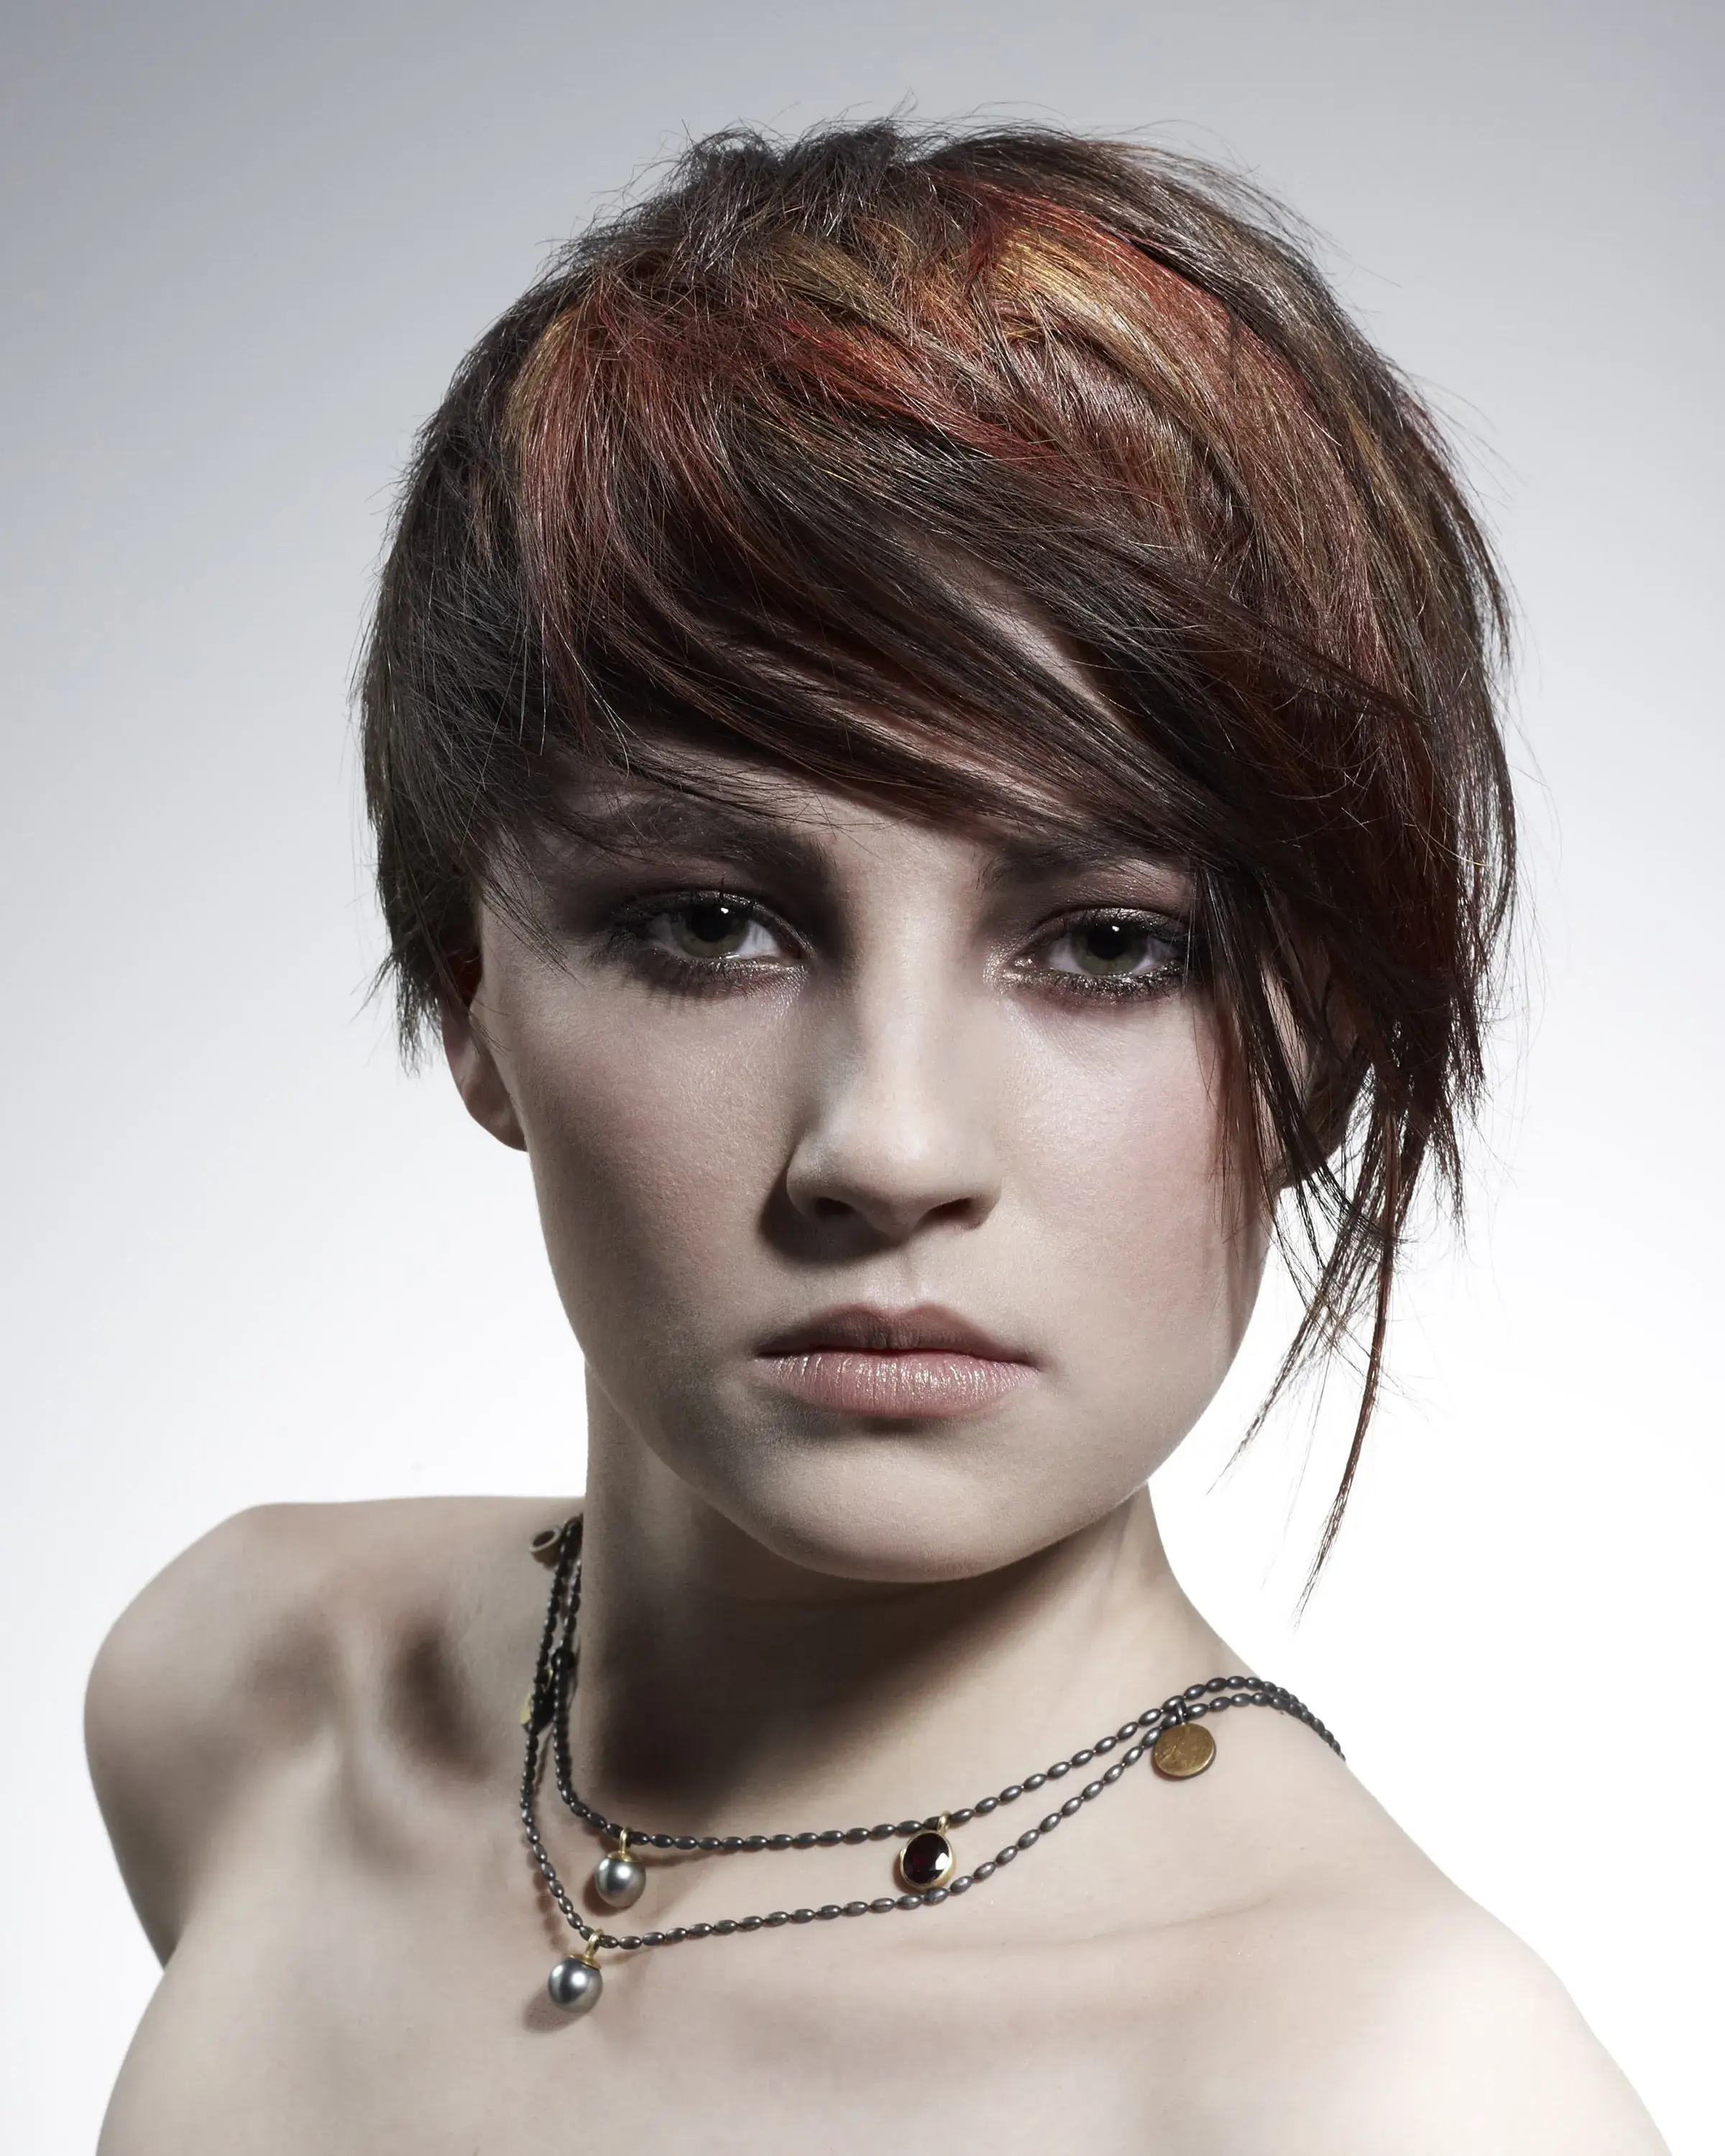 Woman with short brown hair with dramatic fringe